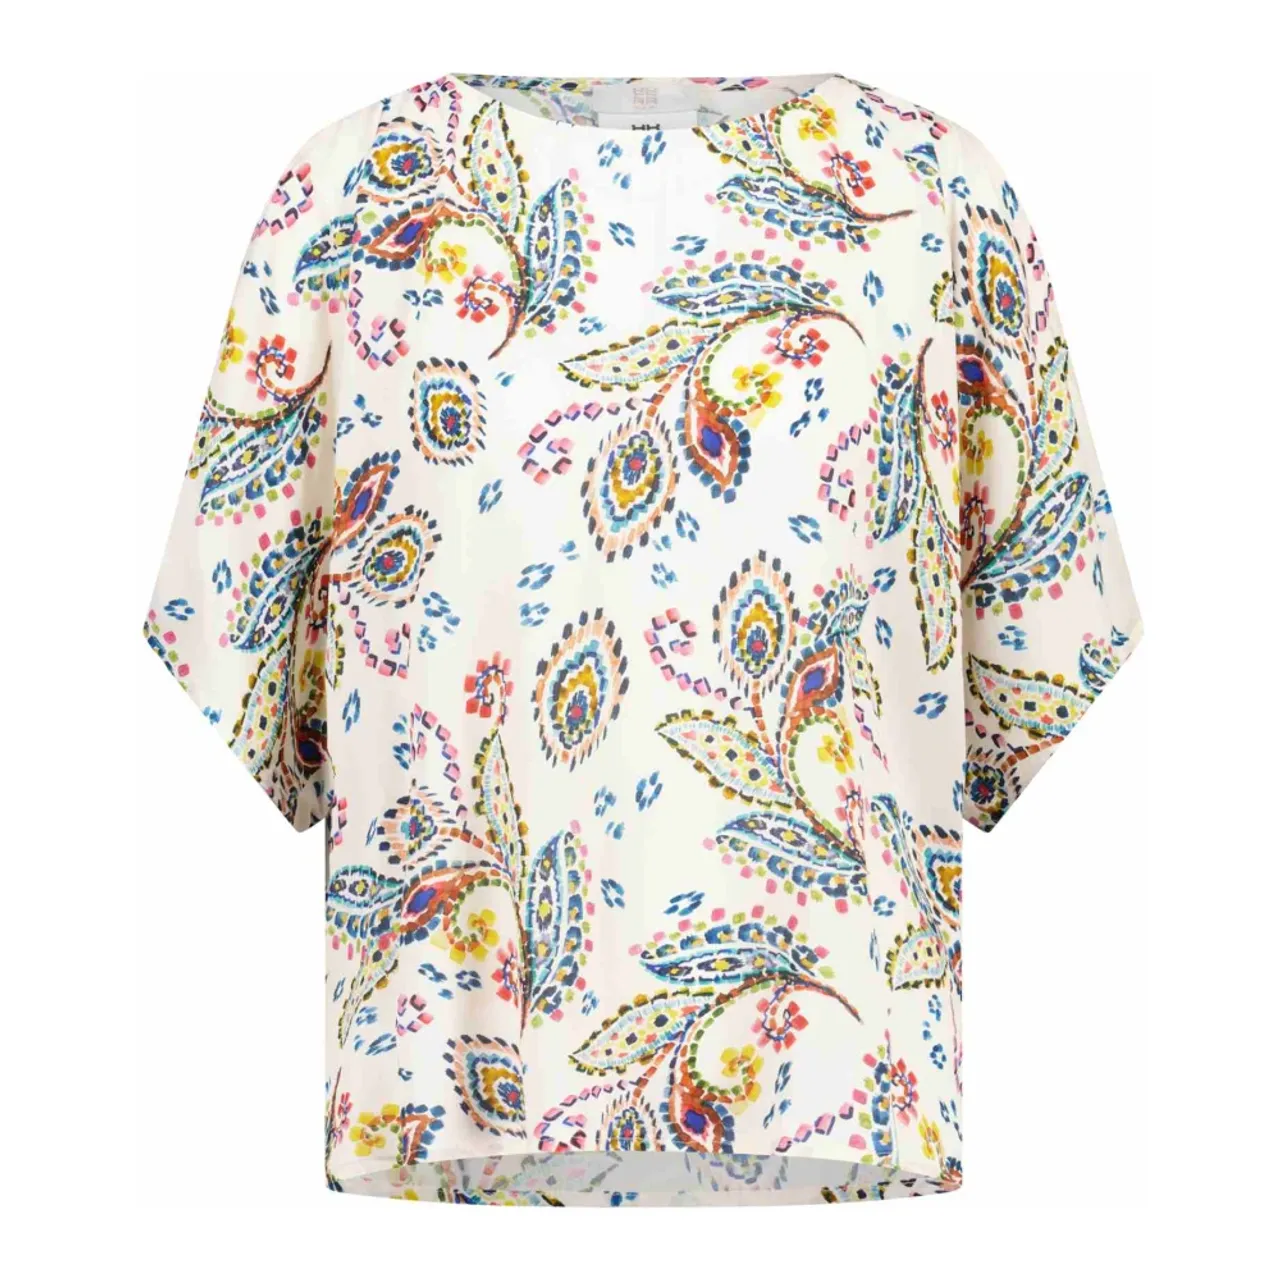 Bluse mit Paisley-Muster Riani